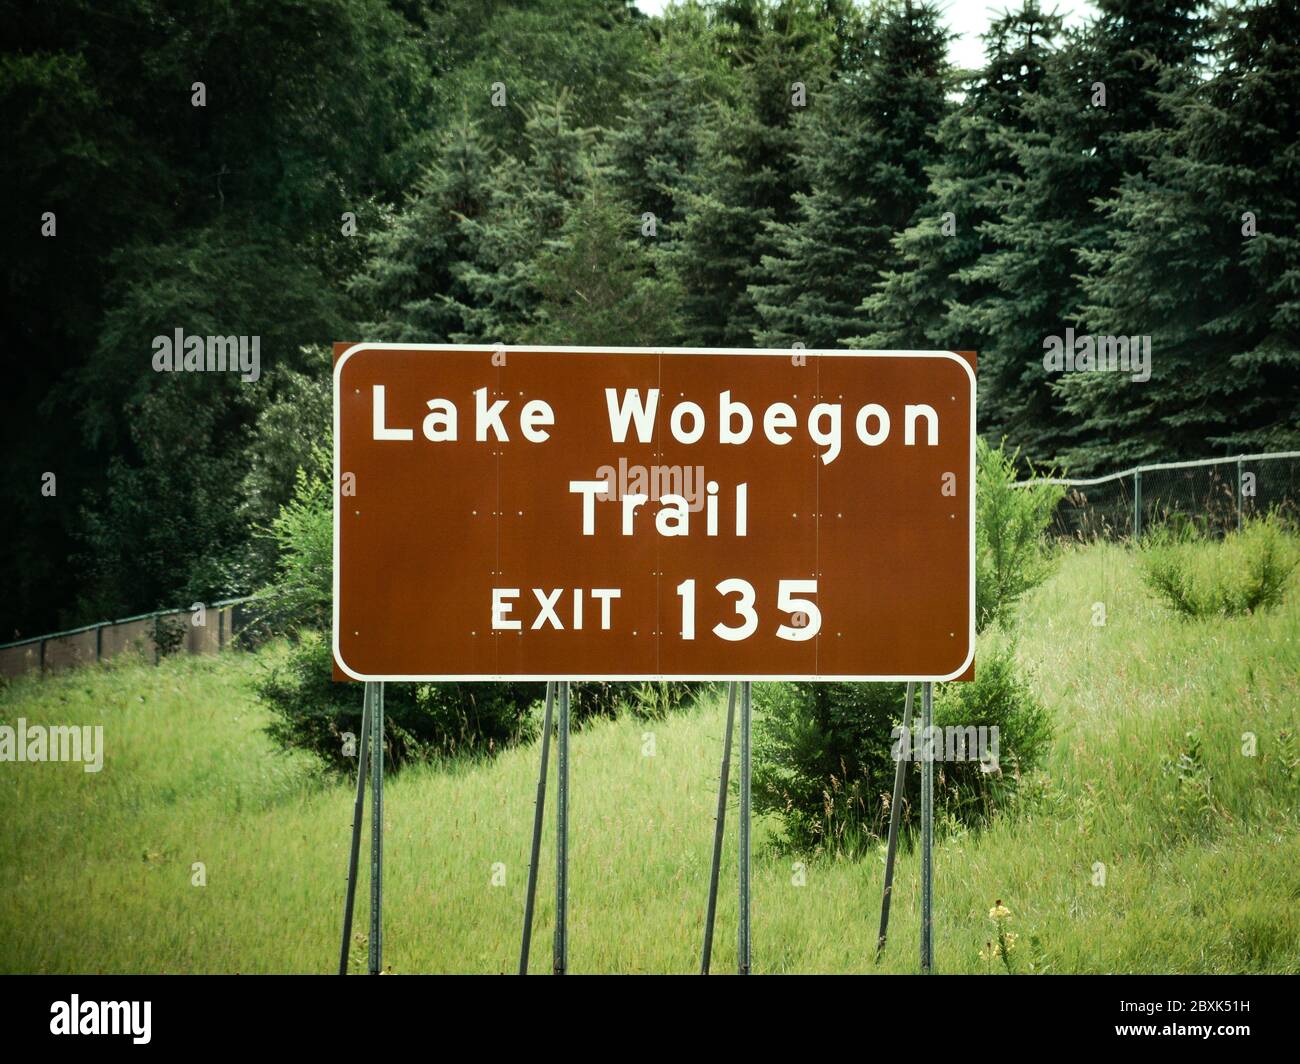 The Lake Wobegon Trail exit 135 road sign, surrounded by forest  in central Minnesota near St. Cloud on a summer's day Stock Photo